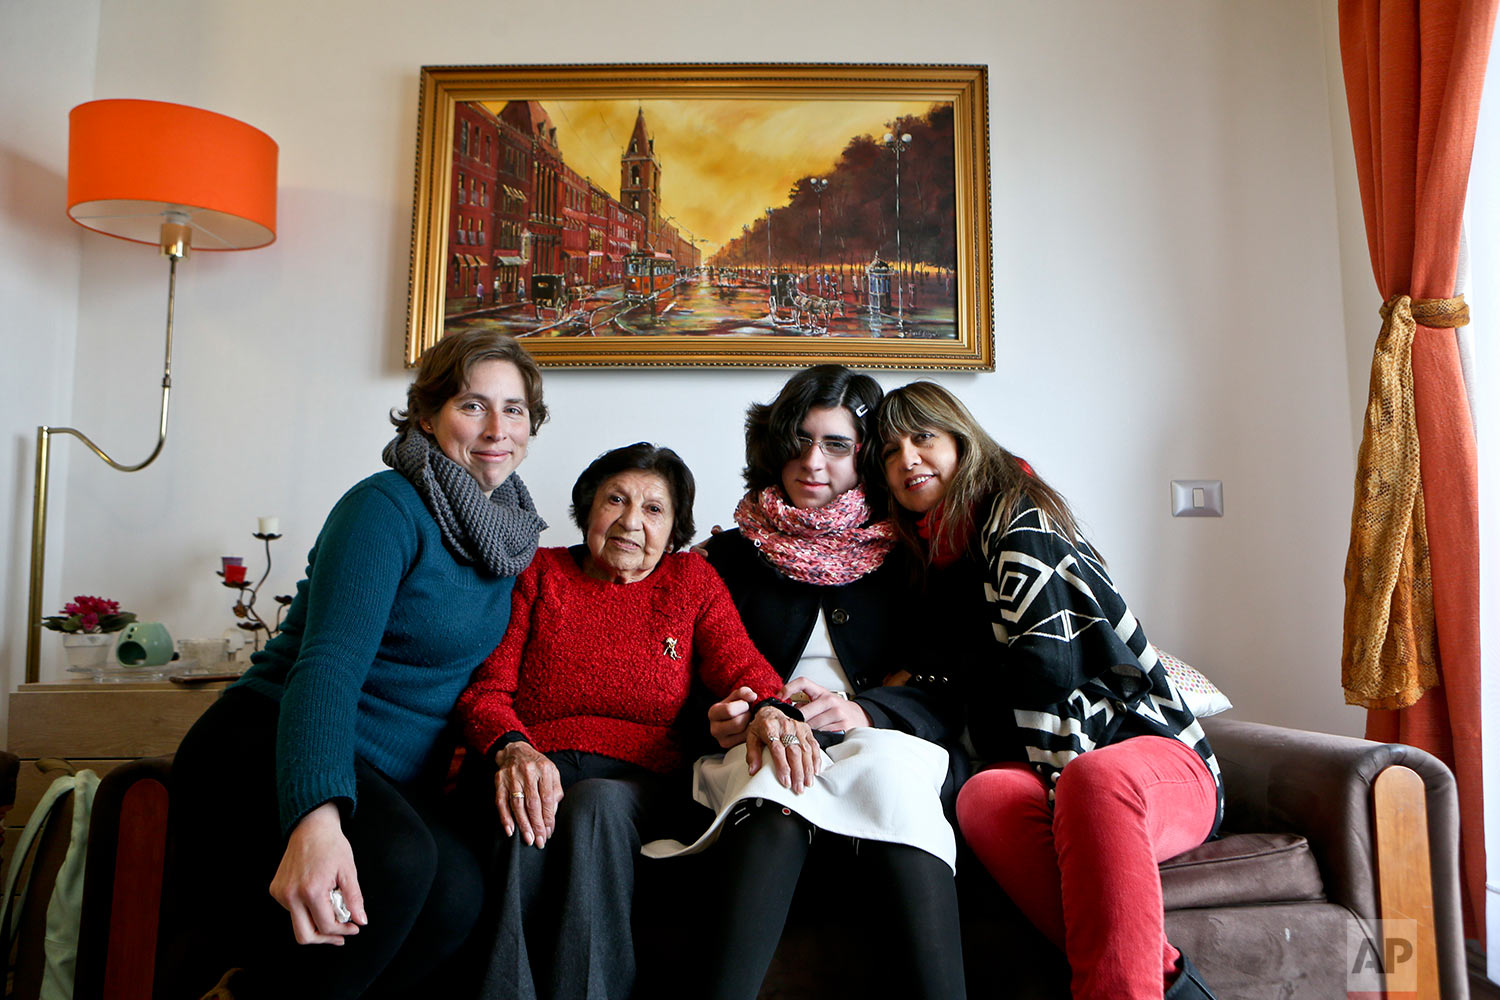  In this June 19, 2017 photo, transgender girl Angela, second from right, poses for a portrait with her mother Ximena Maturana, far left, grandmother, far right, and great-grandmother, at her home in Santiago, Chile. Angela, who was born male, said s